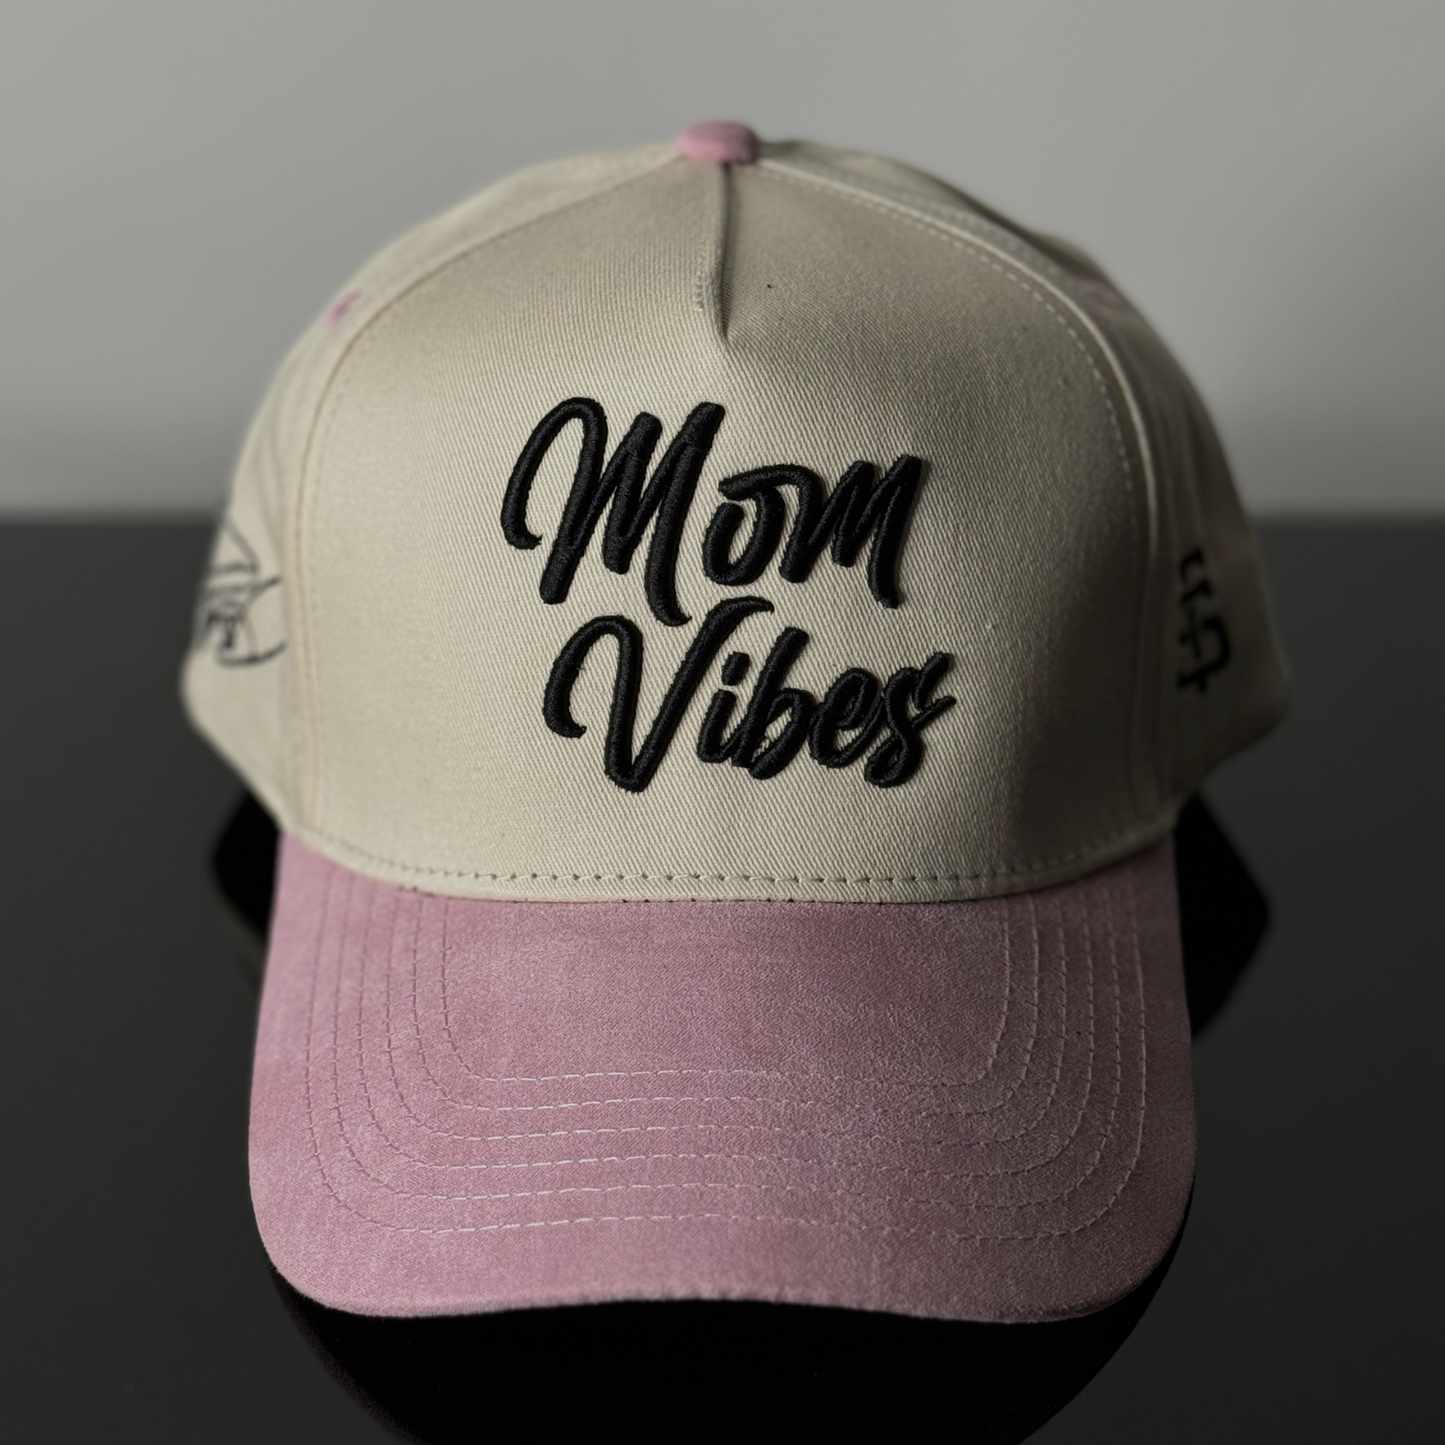 Mom Vibes (Limited Edition)